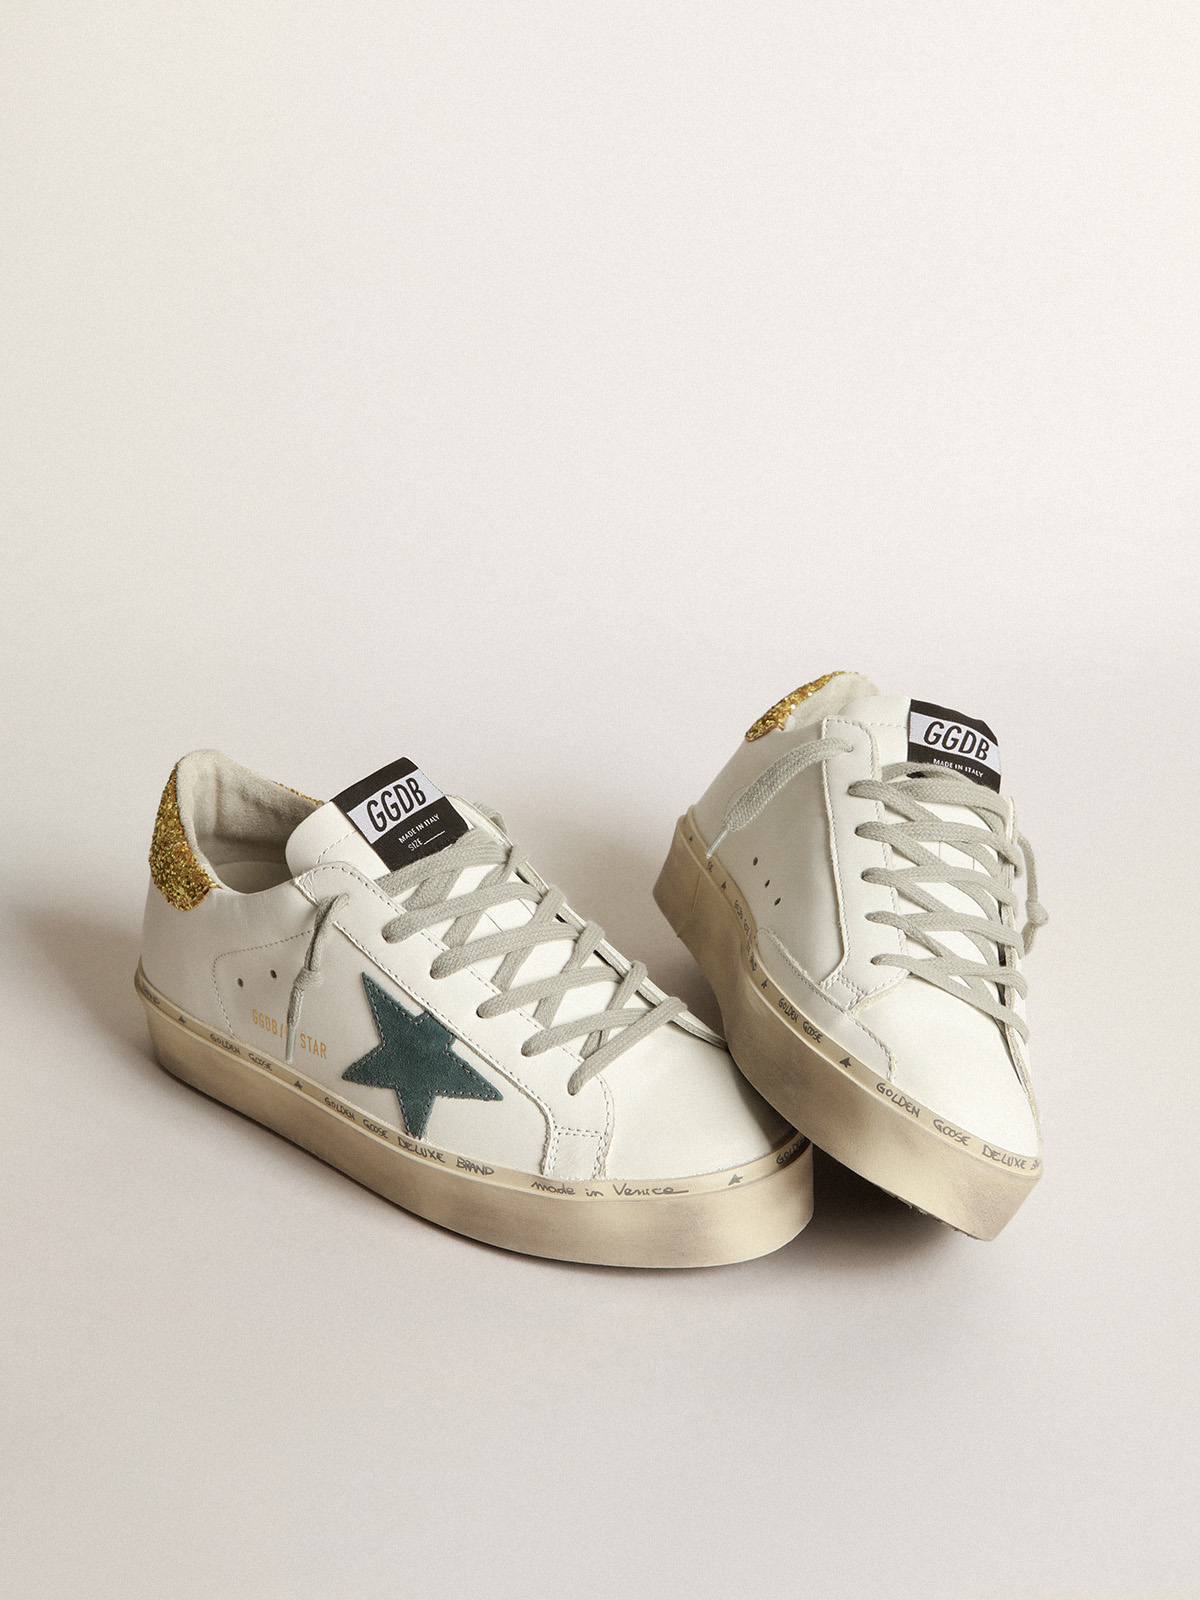 Hi Star sneakers with petrol-blue suede star and gold glitter heel tab |  Golden Goose